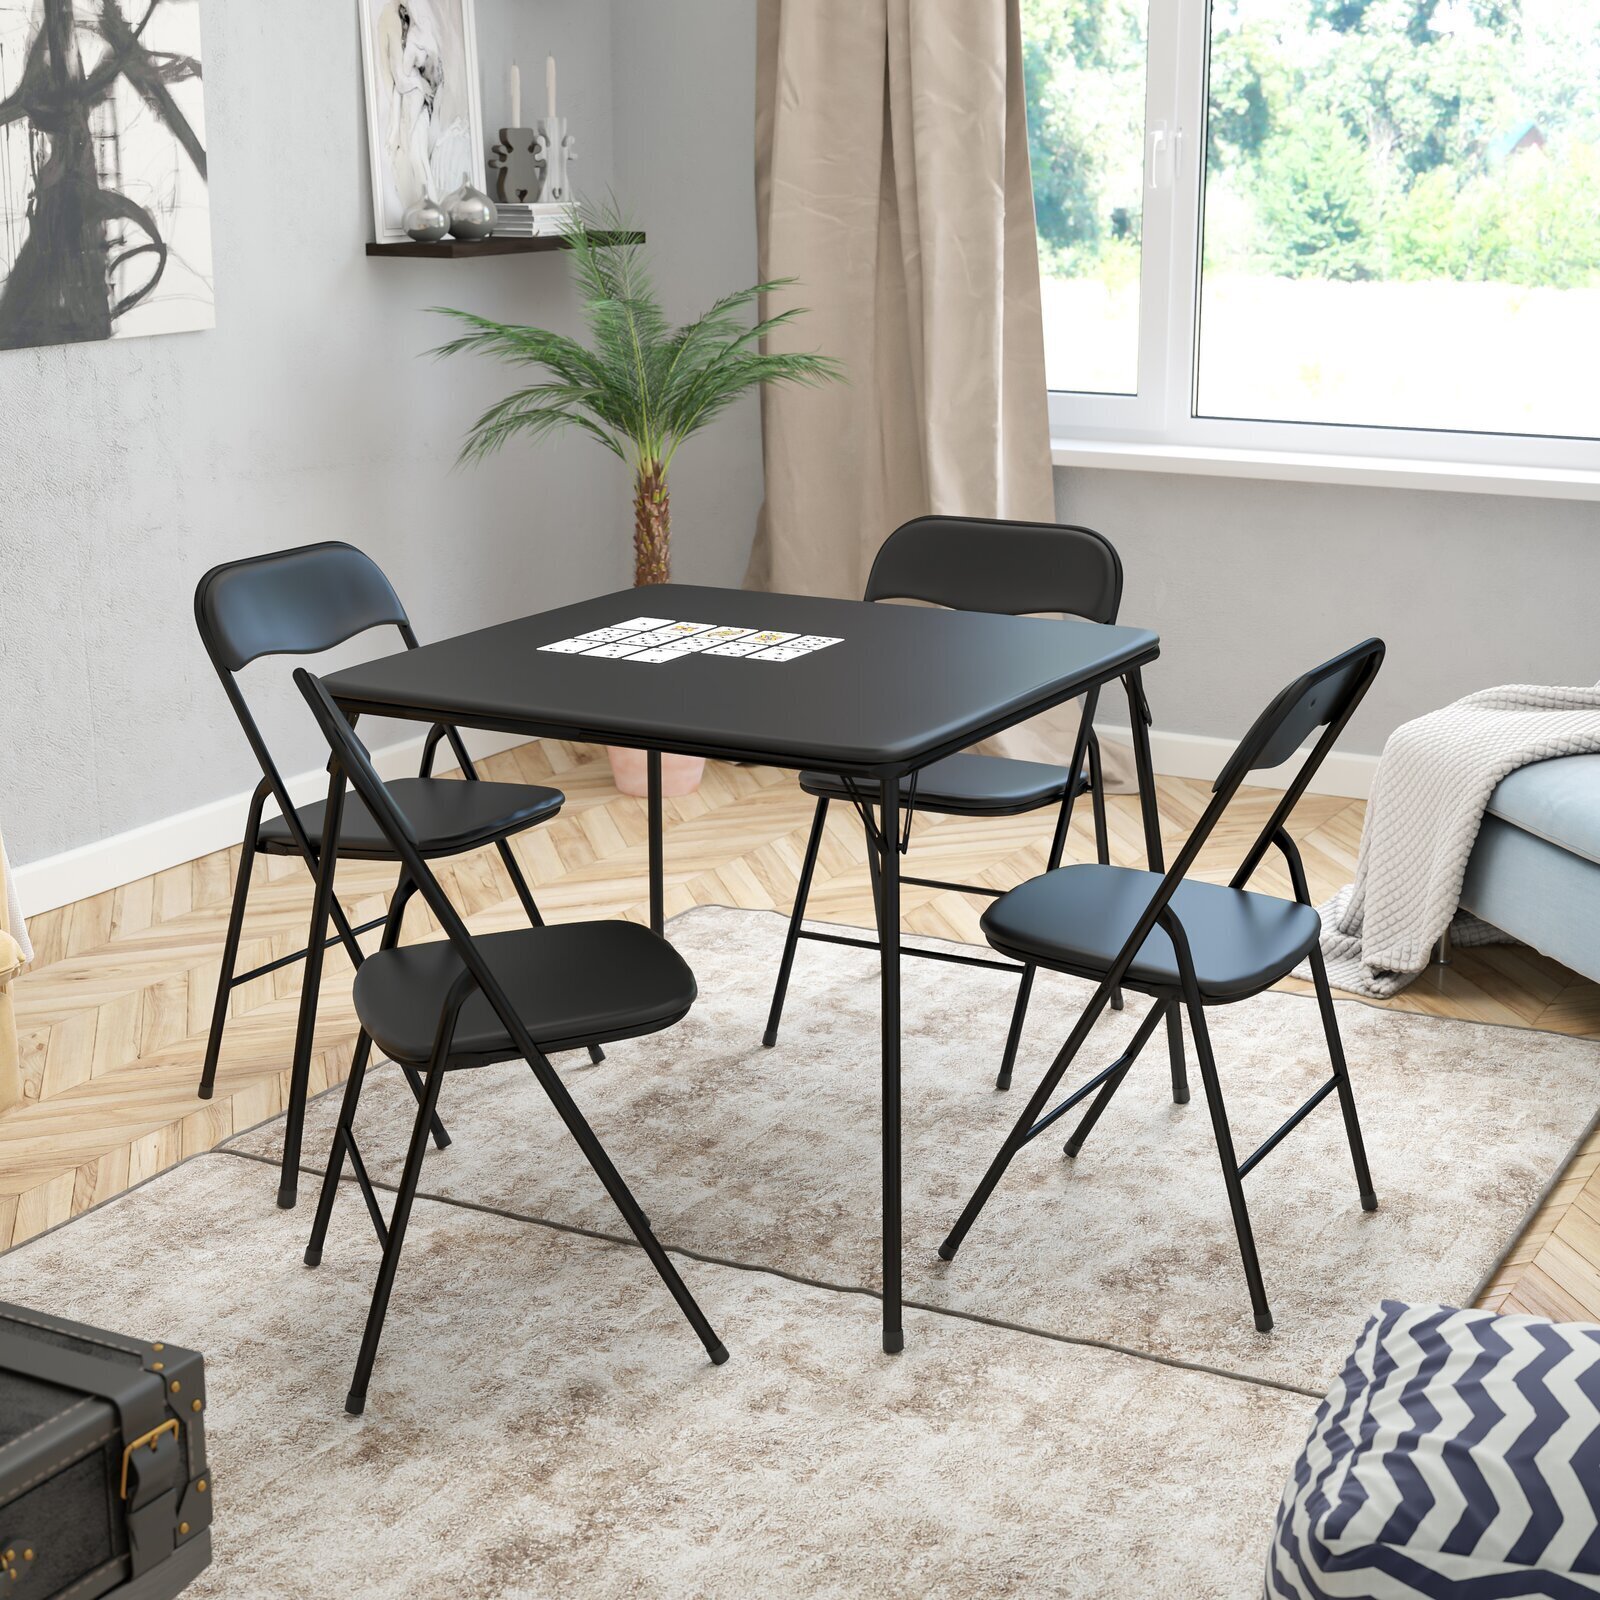 Lightweight Padded Foldable Table